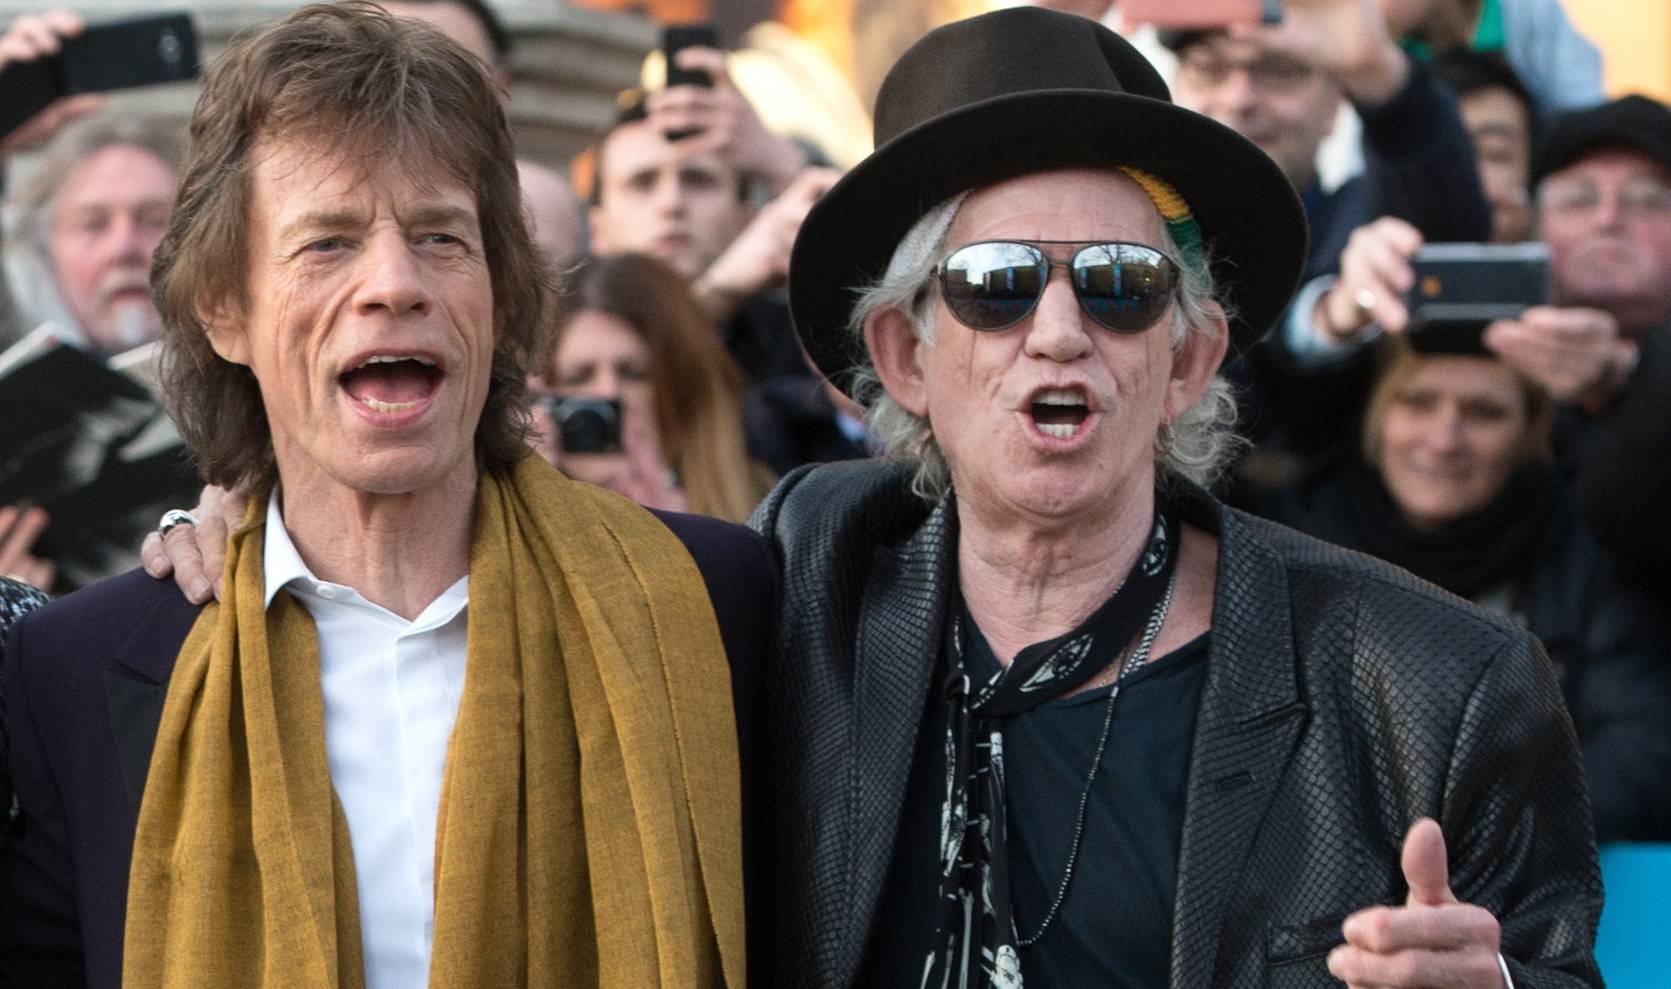 The Rolling Stones: Exhibitionism Private View in London - Arrivals